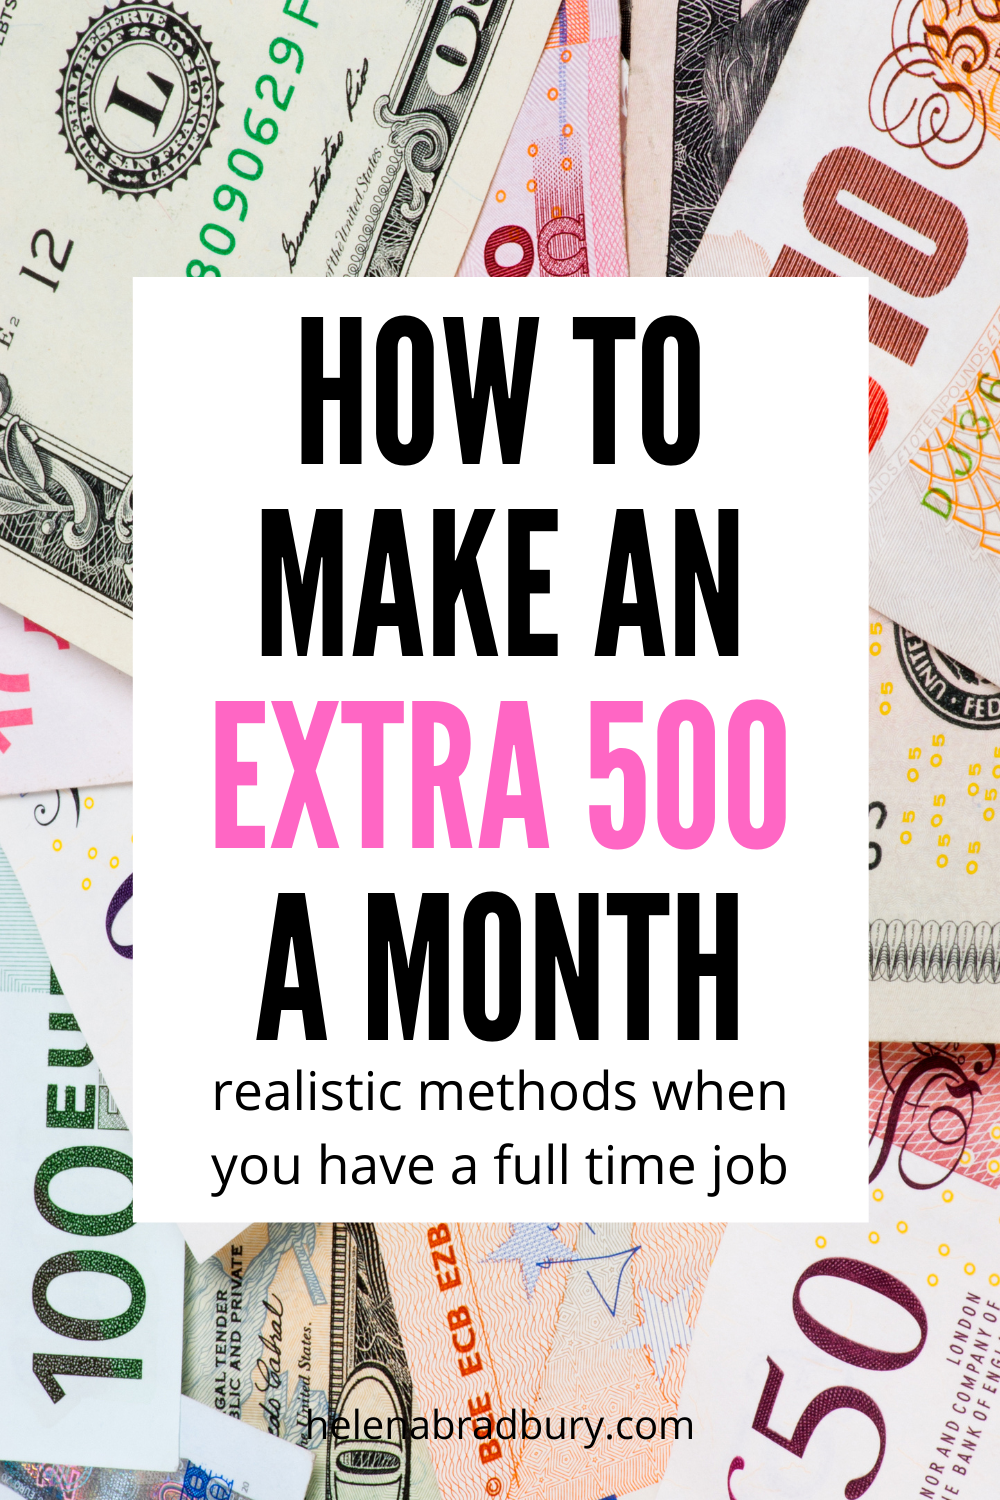 These are realistic ways to make make an extra 500 a month, whether you’re looking for a side hustle or just some extra cash while you work full time, and I’ve done them all | make extra 500 a month | how to make an extra $500 a month | how to get m…